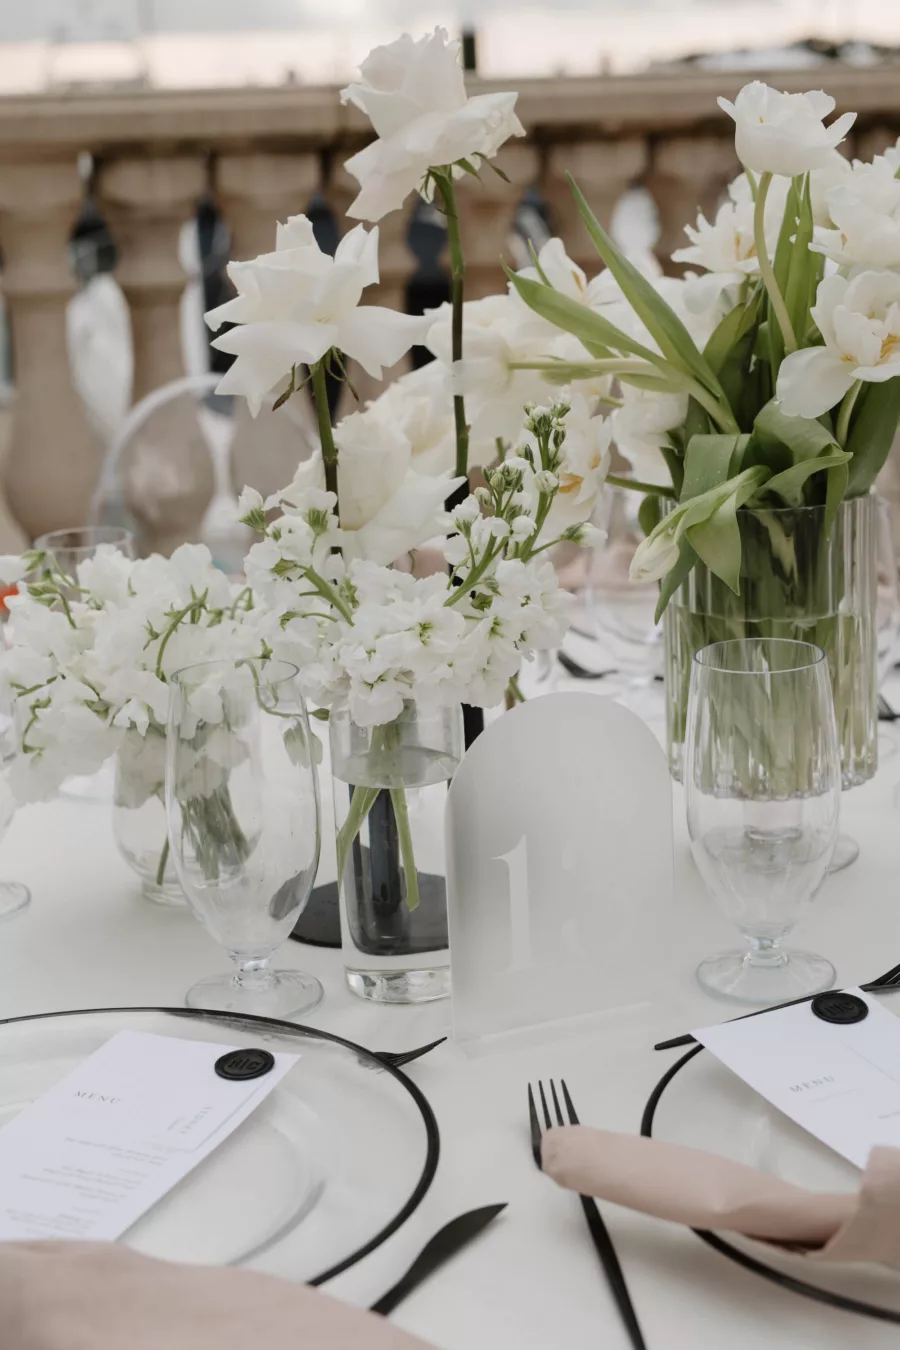 Modern Wedding Reception Floral Centerpiece Decor Ideas | White Hydrangeas, Orchids, and Roses | Frosted Acrylic Table Number Sign | Champagne Napkin Linens, Black-Rimmed Chargers, Black Flatware Place Setting Inspiration